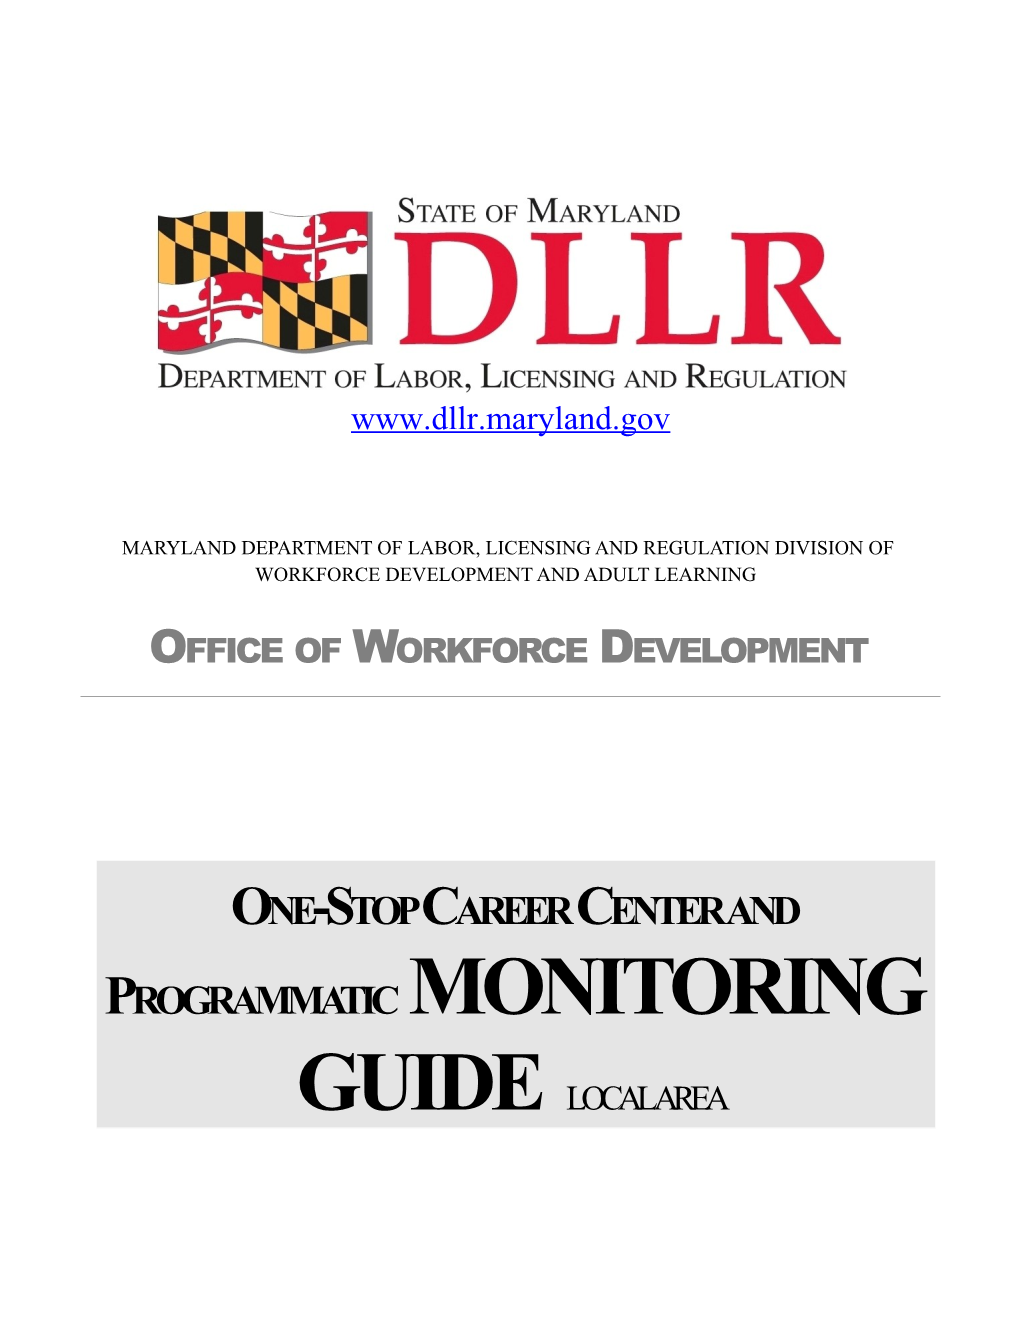 One Stop Career Center and Programmatic Monitoring Guide